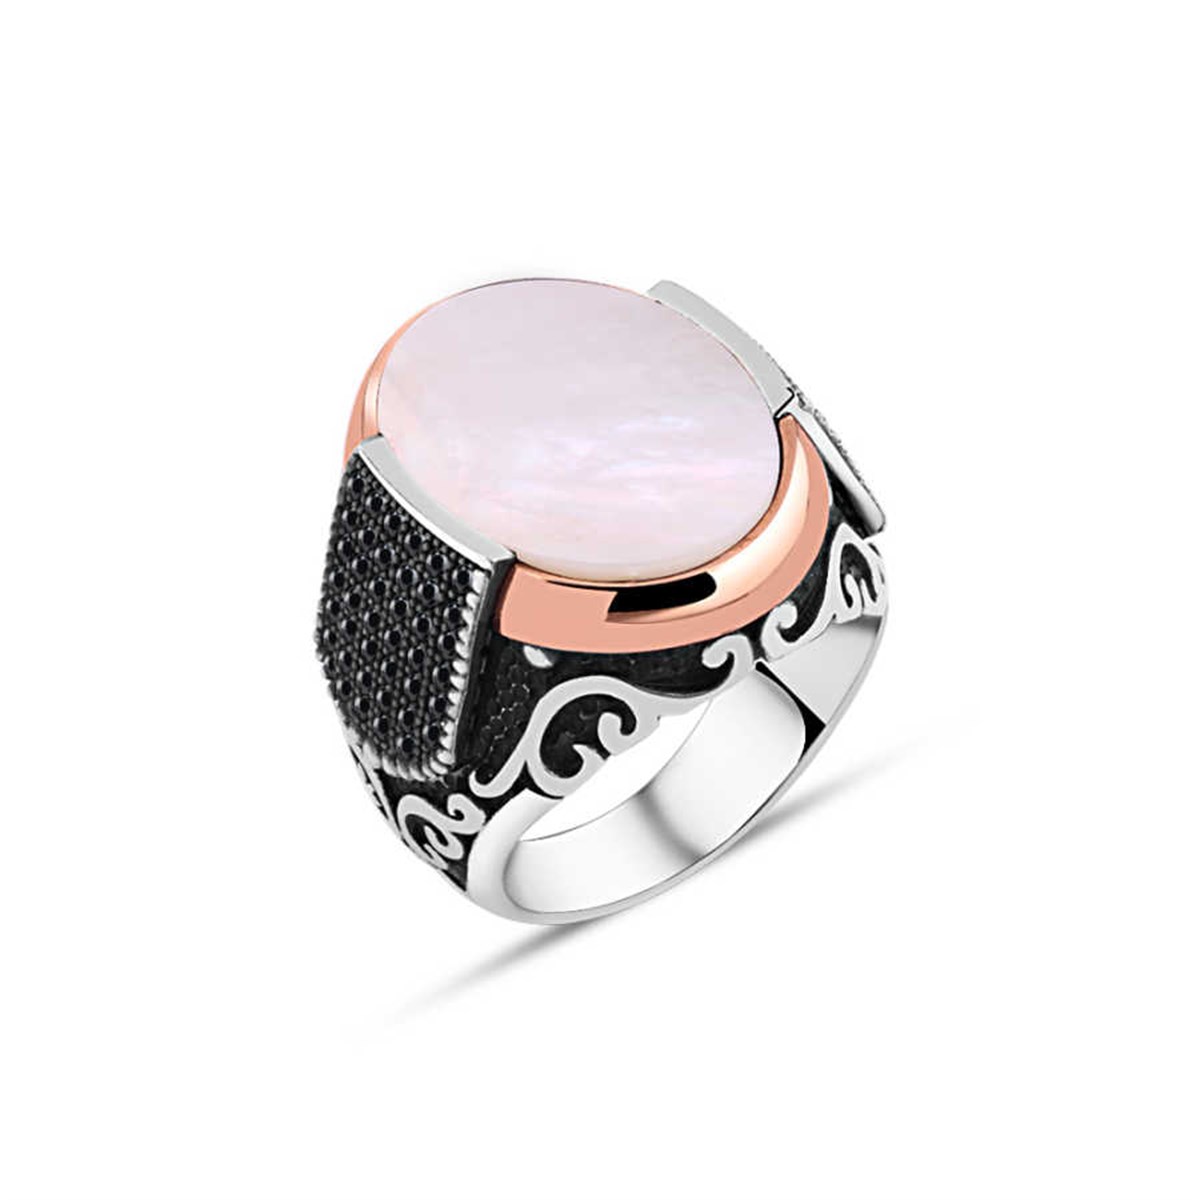 Plain Mother of Pearl Stone Sterling Silver Men's Ring